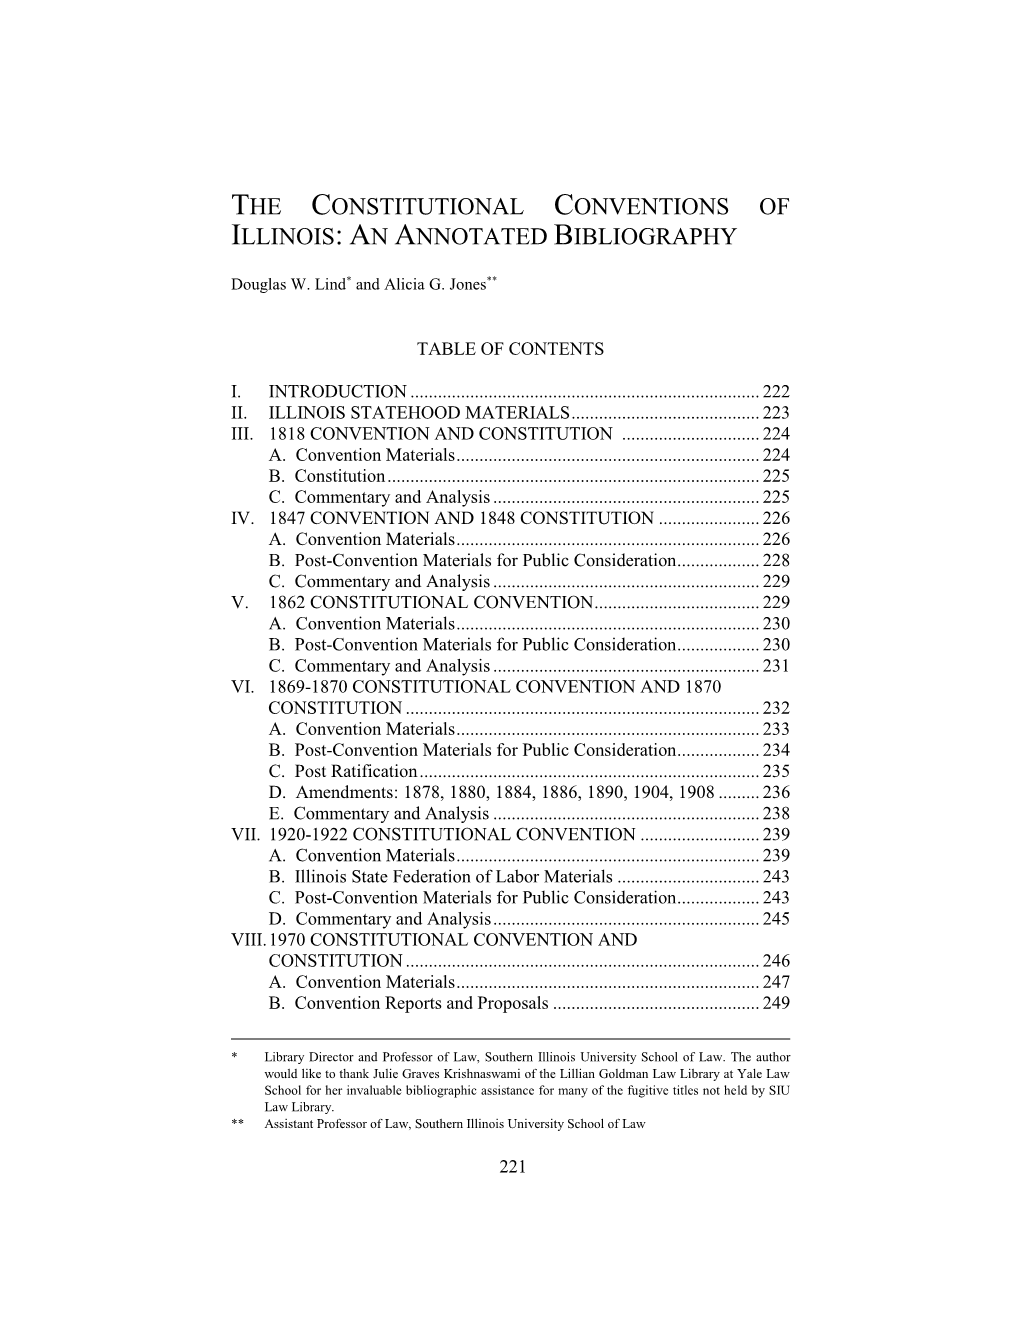 "The Constitutional Conventions of Illinois: an Annotated Bibliography